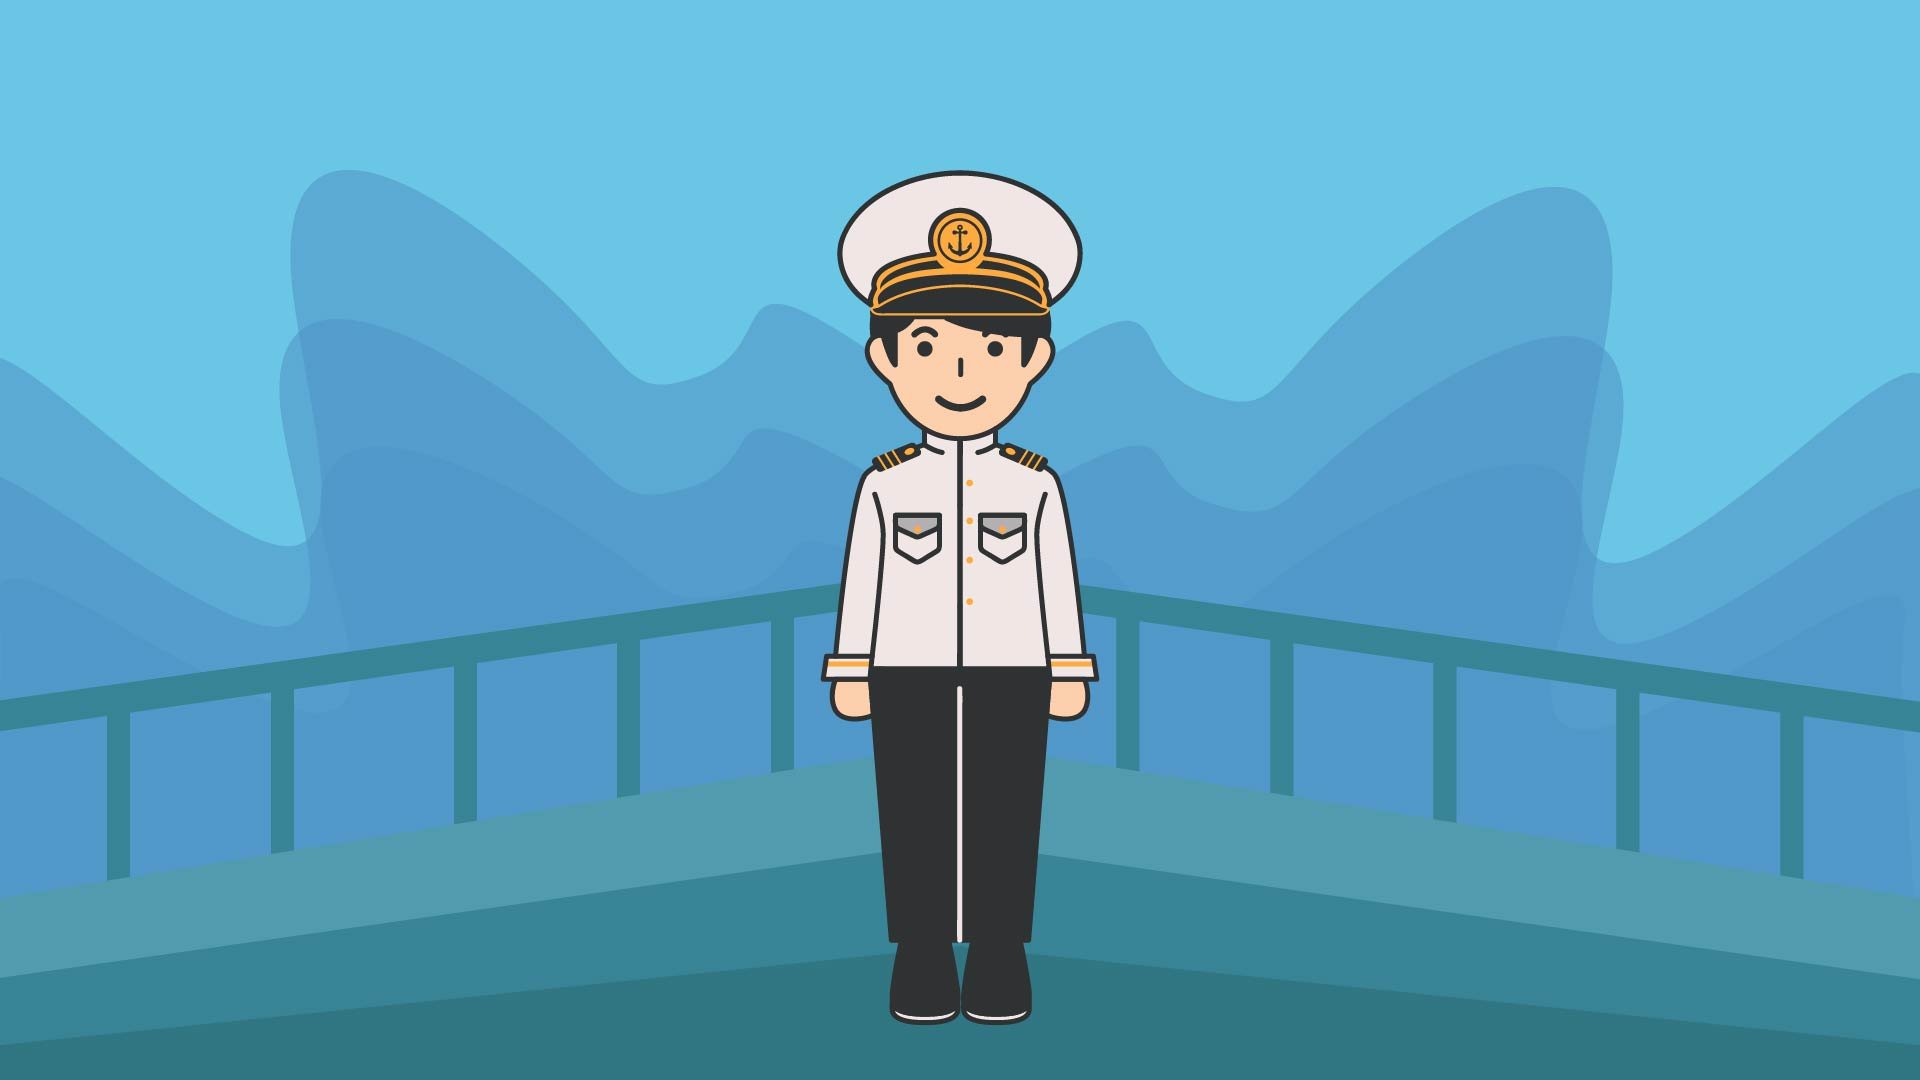 Free National Maritime Day Cartoon Background in PDF, Illustrator, PSD, EPS, SVG, JPG, PNG